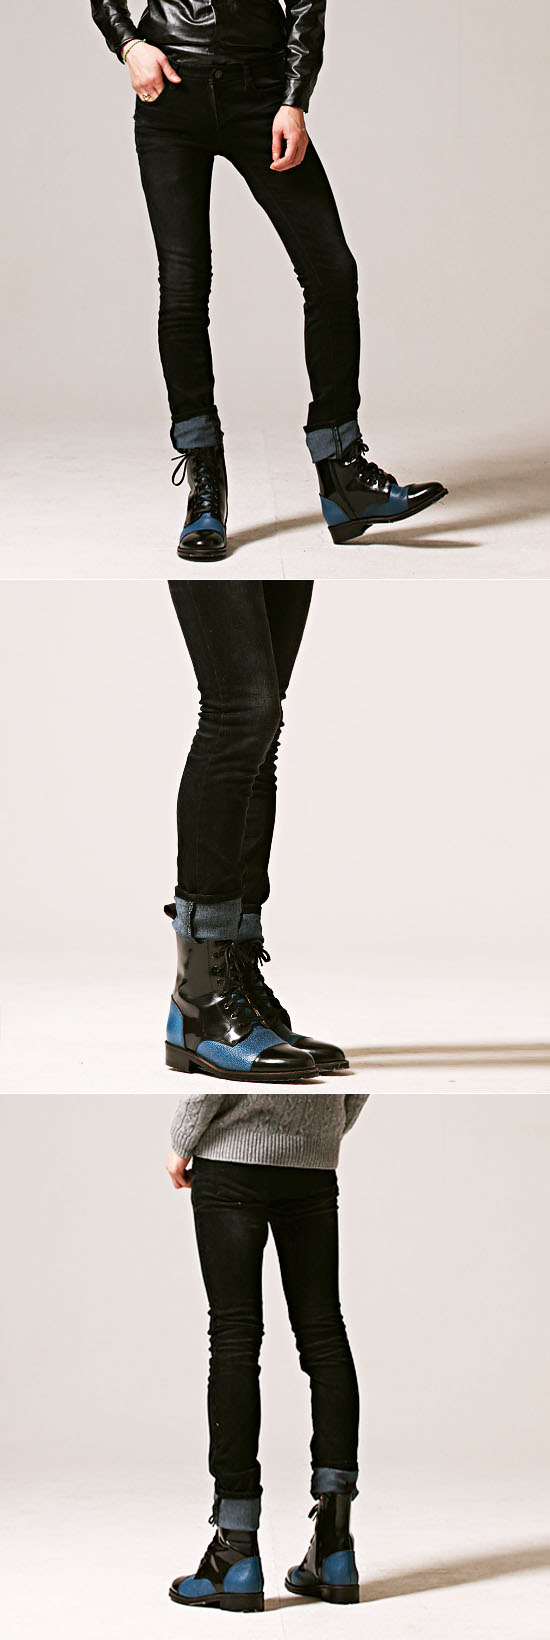 Shoes :: Contrast Point Runway Fashion Boots-Shoes 162 - GUYLOOK Men's ...